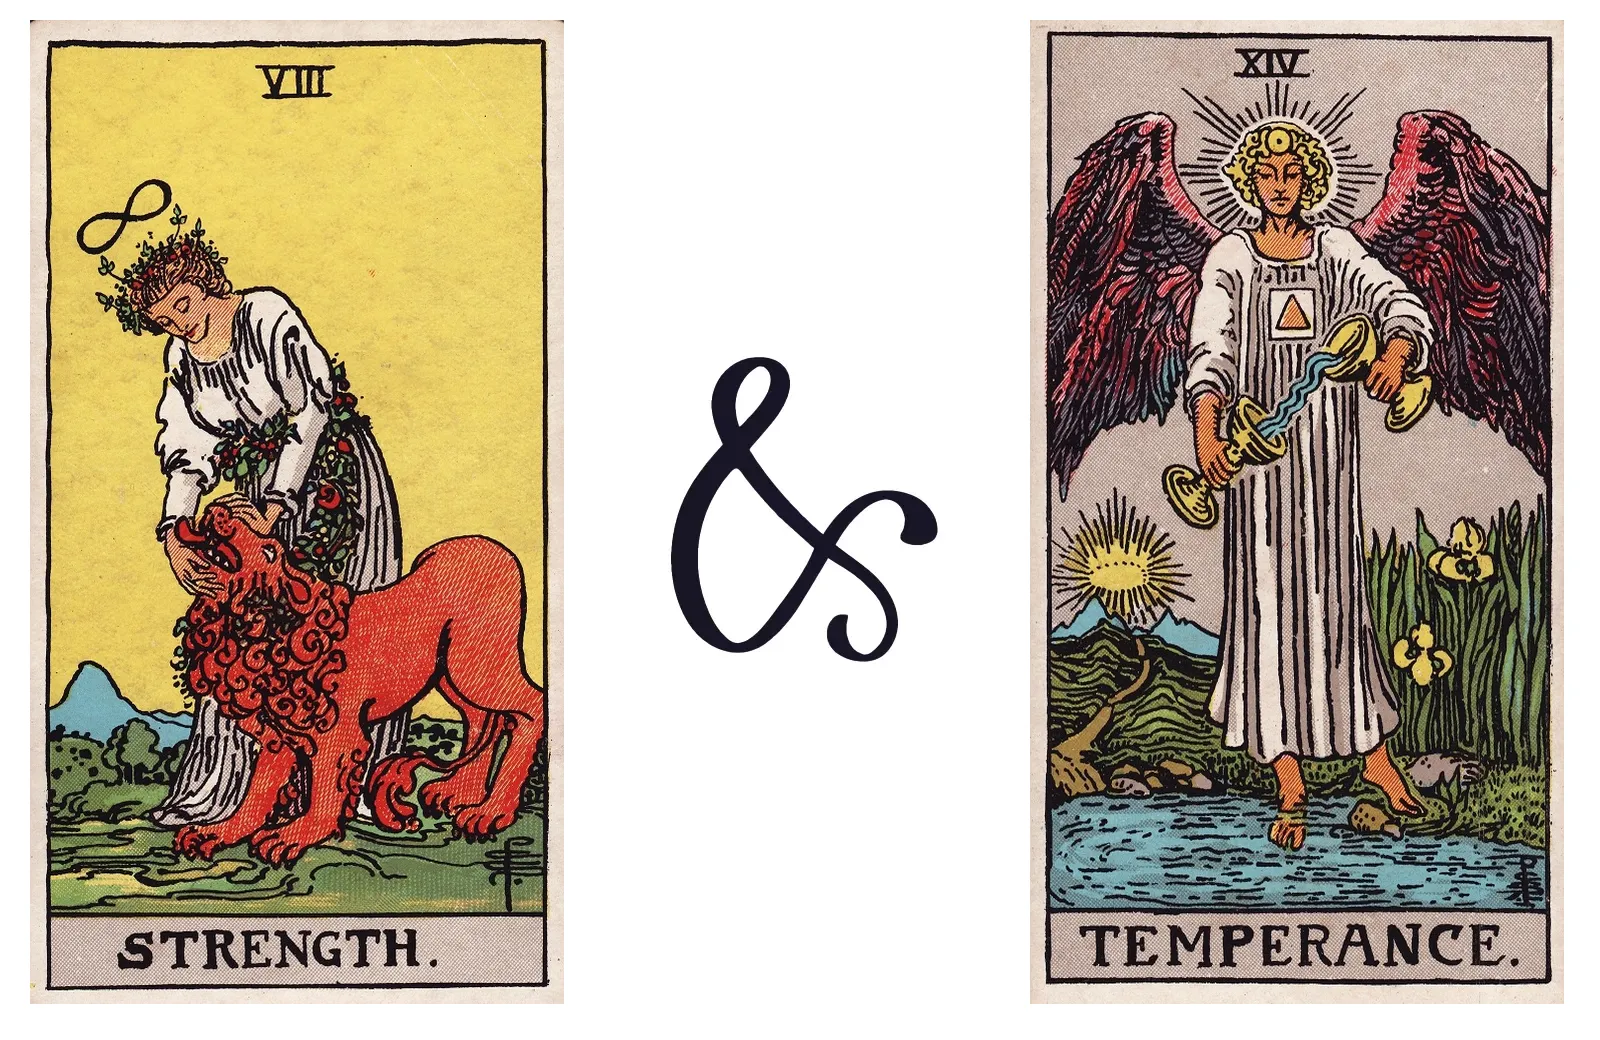 Strength and Temperance